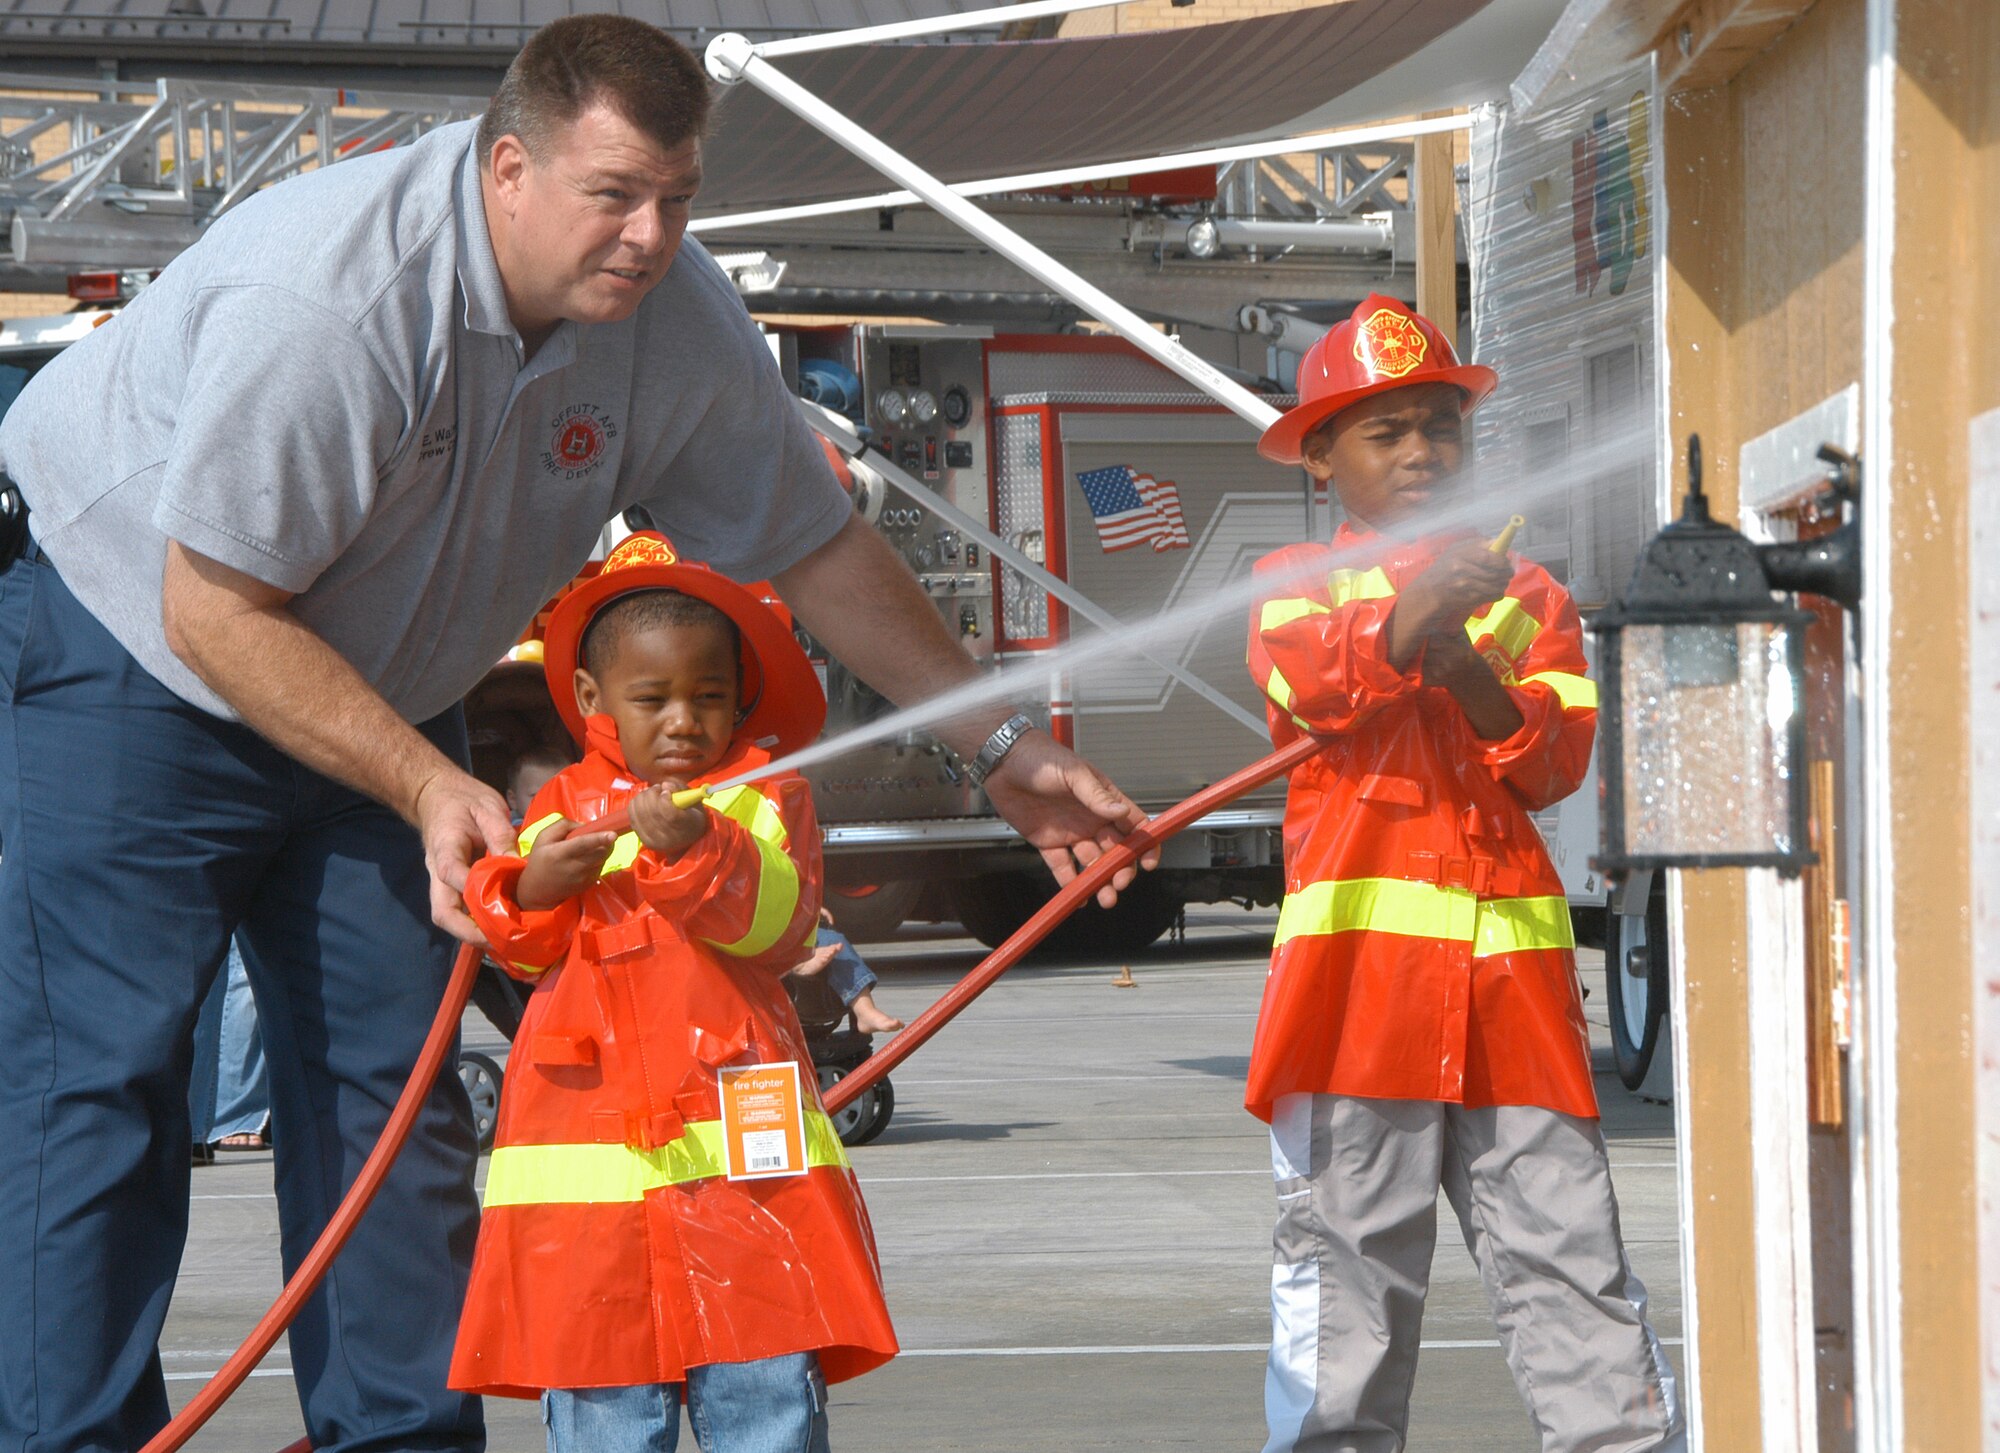 OFFUTT AIR FORCE BASE, Neb. -- Fire Captain Ed Walter gives instructions to A.J. Little, age two, and D.J. Fisher, age six, sons of Staff Sgt. Shavonda Fisher, U.S. Strategic Command, on how to handle a fire hose and where to spray water during the 2008 Offutt Fire Station Open House Oct. 11. (U.S. Air Force Photo By Jeff Gates)                                                                                                                                                                       